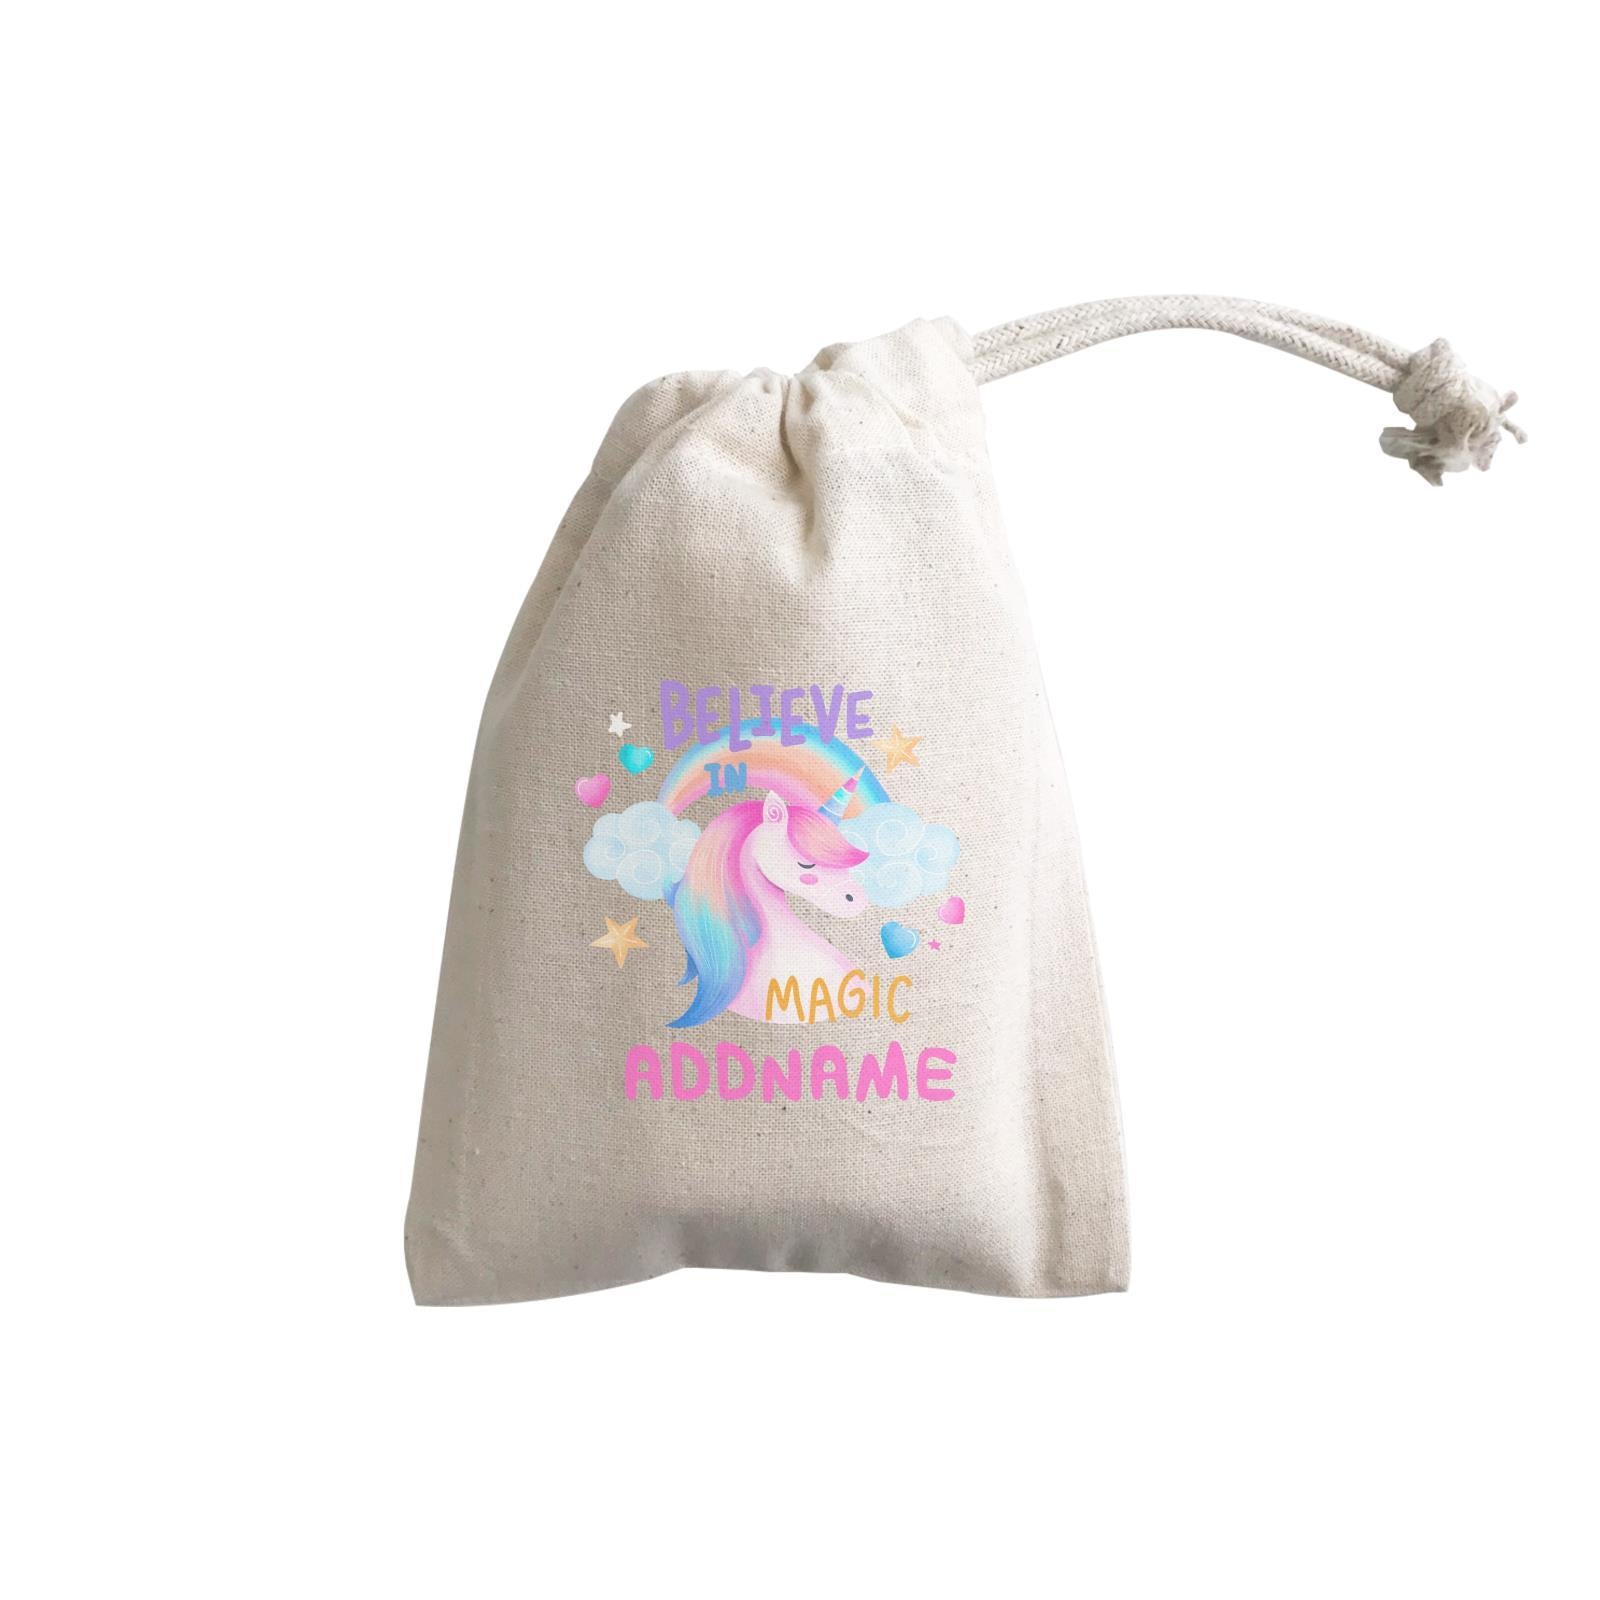 Children's Day Gift Series Believe In Magic Unicorn Addname  Gift Pouch